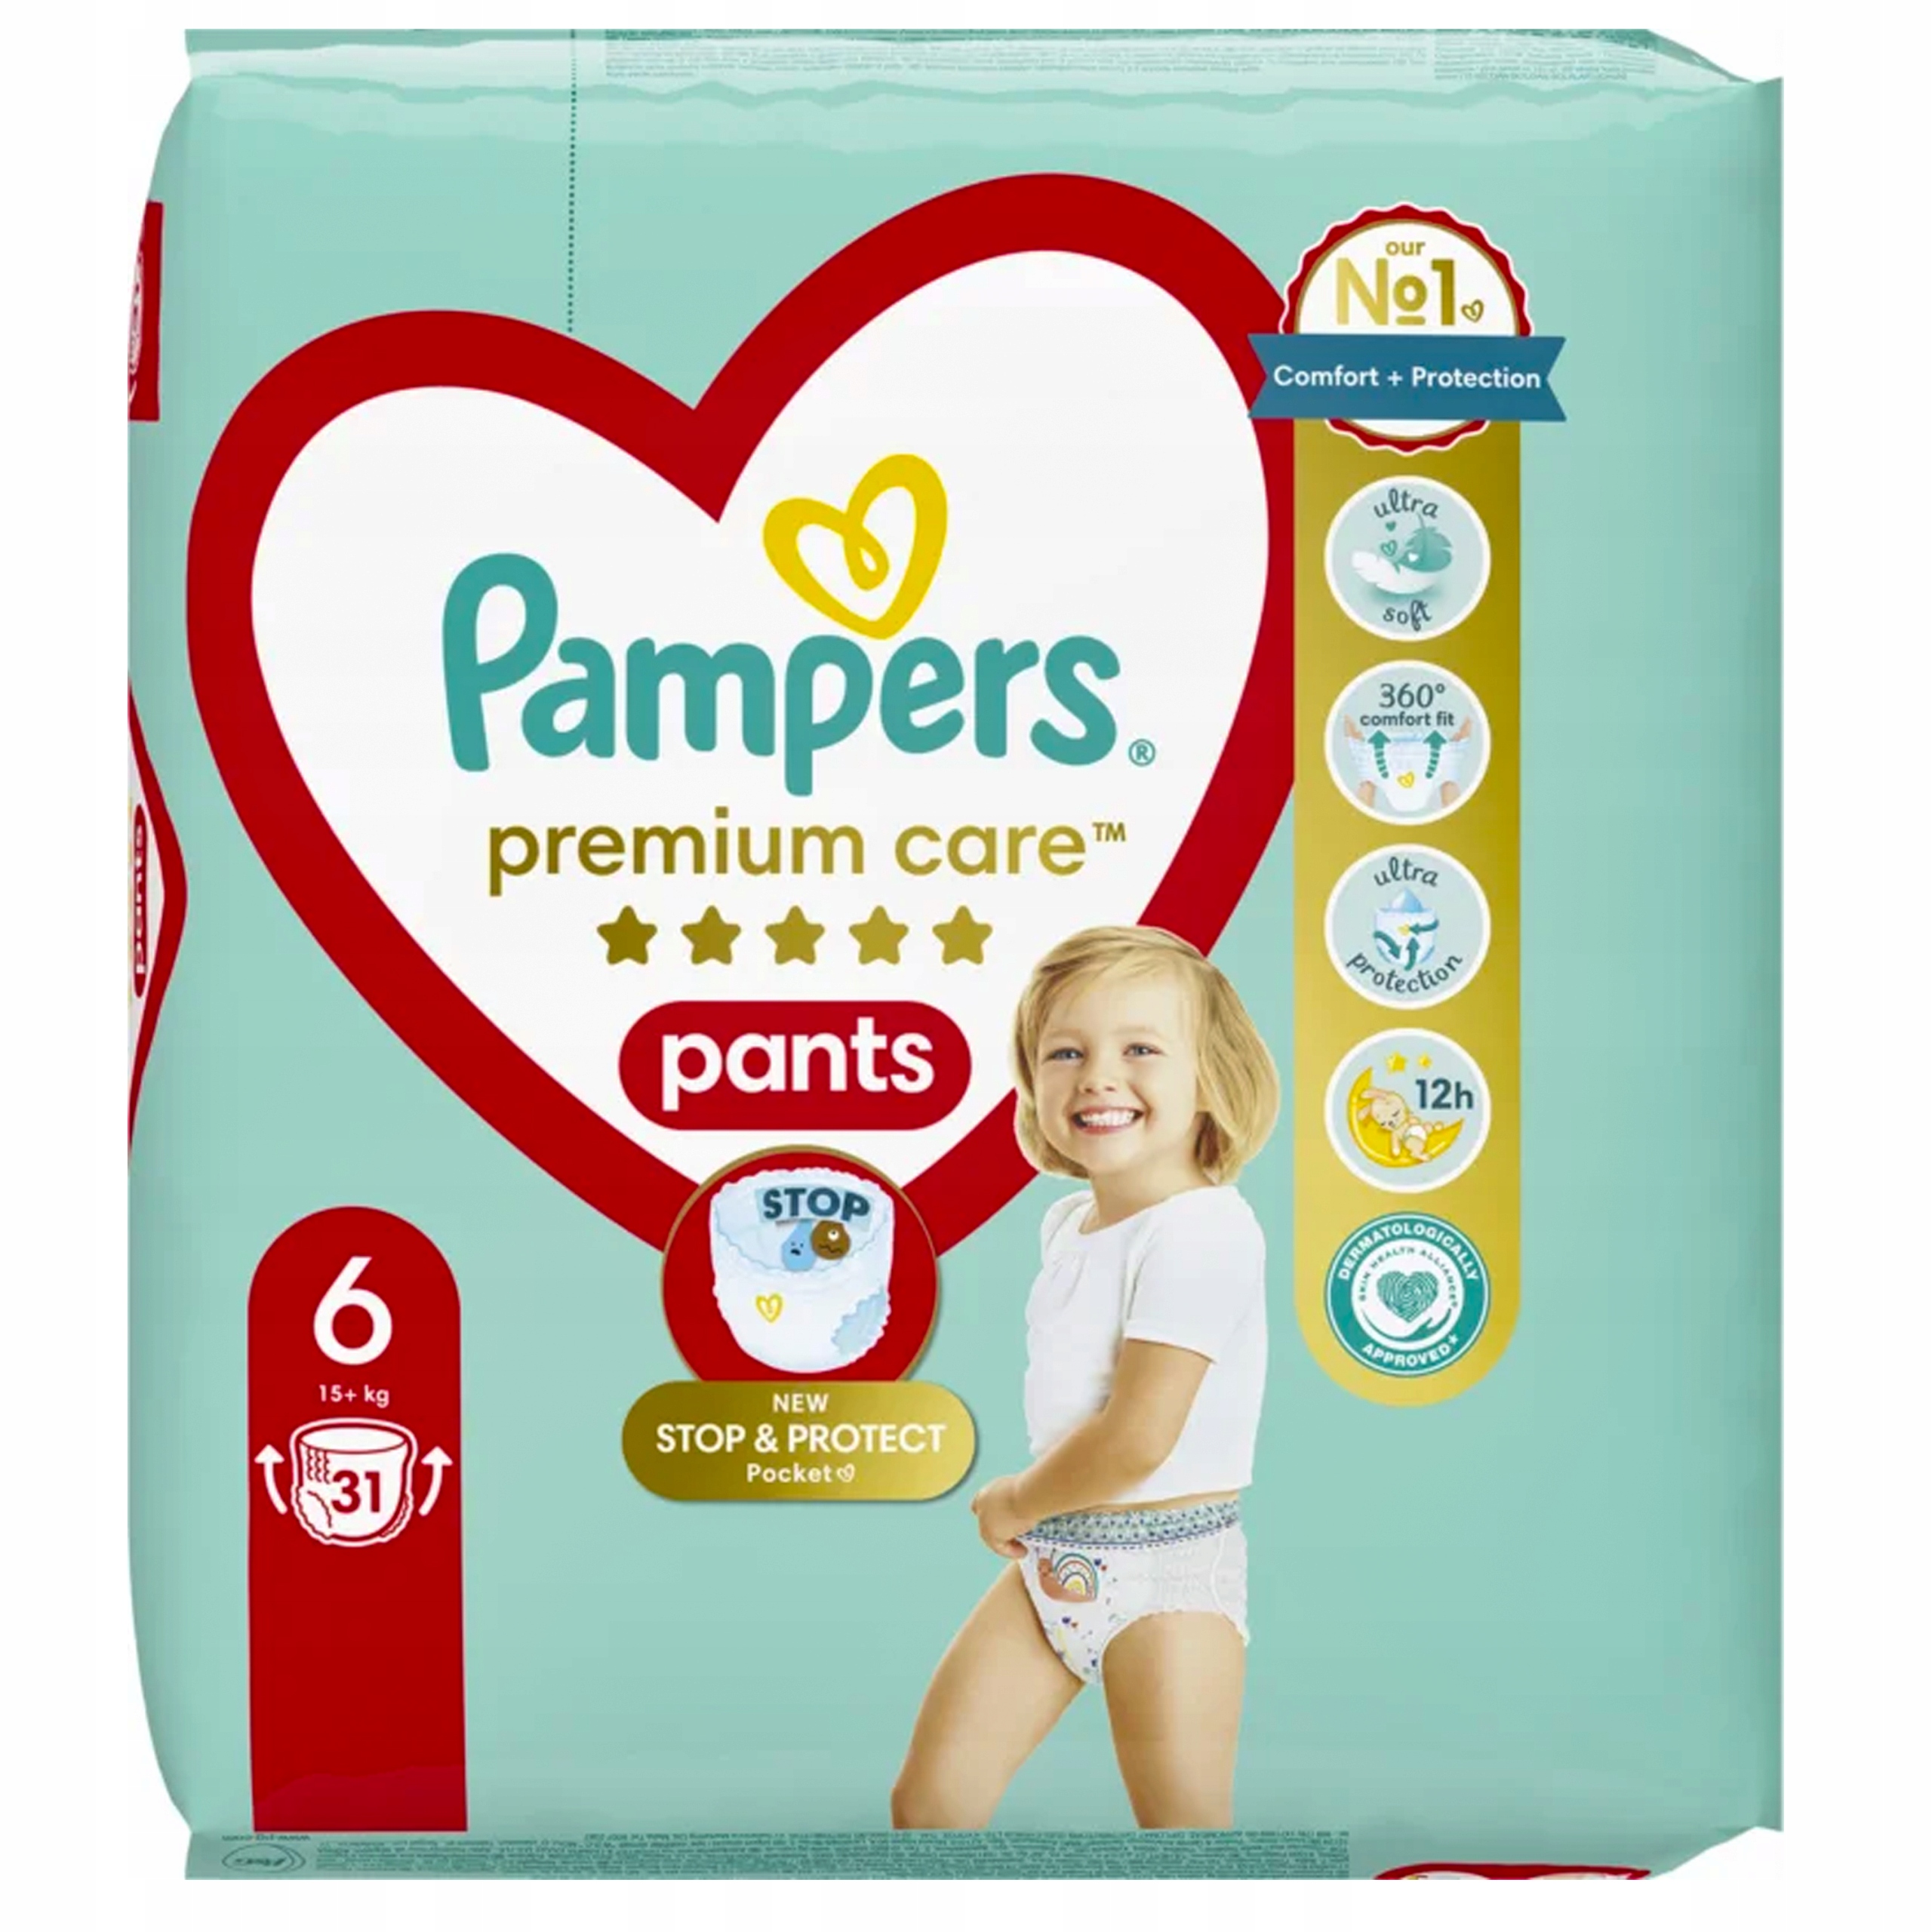 pampers fitness challenge